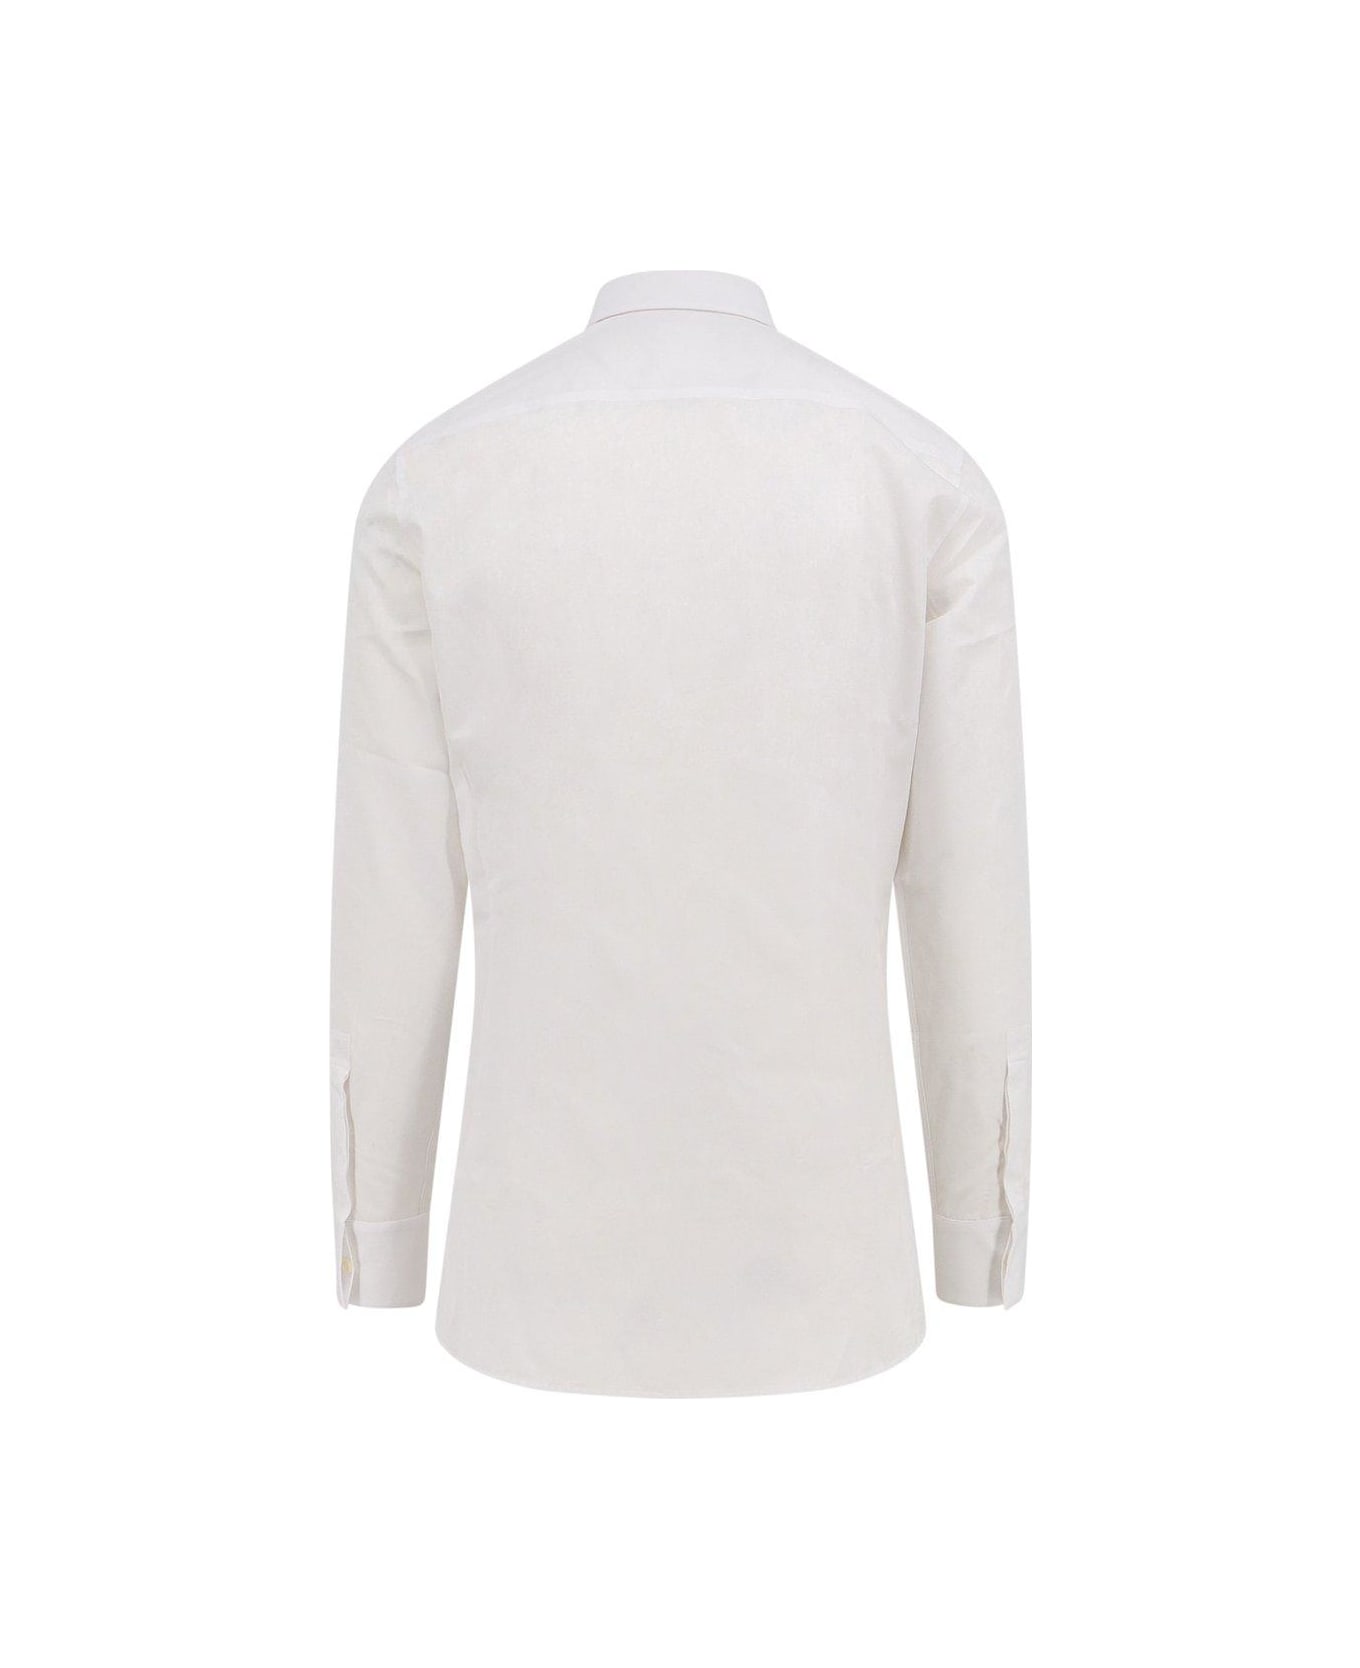 Givenchy Embroidered Long-sleeved Shirt - White